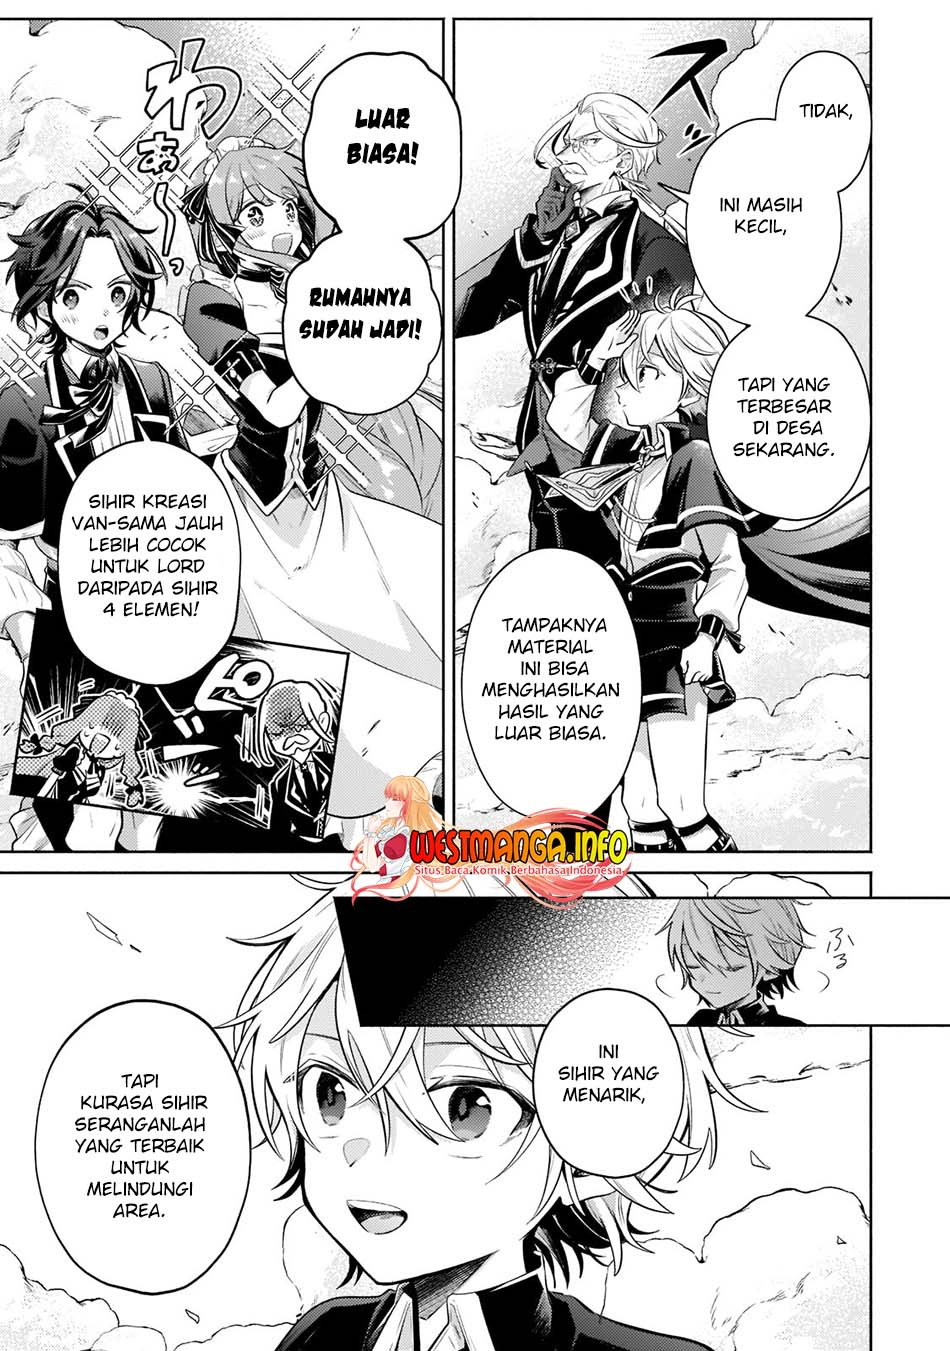 Fun Territory Defense Of The Easy-Going Lord ~The Nameless Village Is Made Into The Strongest Fortified City By Production Magic~ Chapter 09 - 215